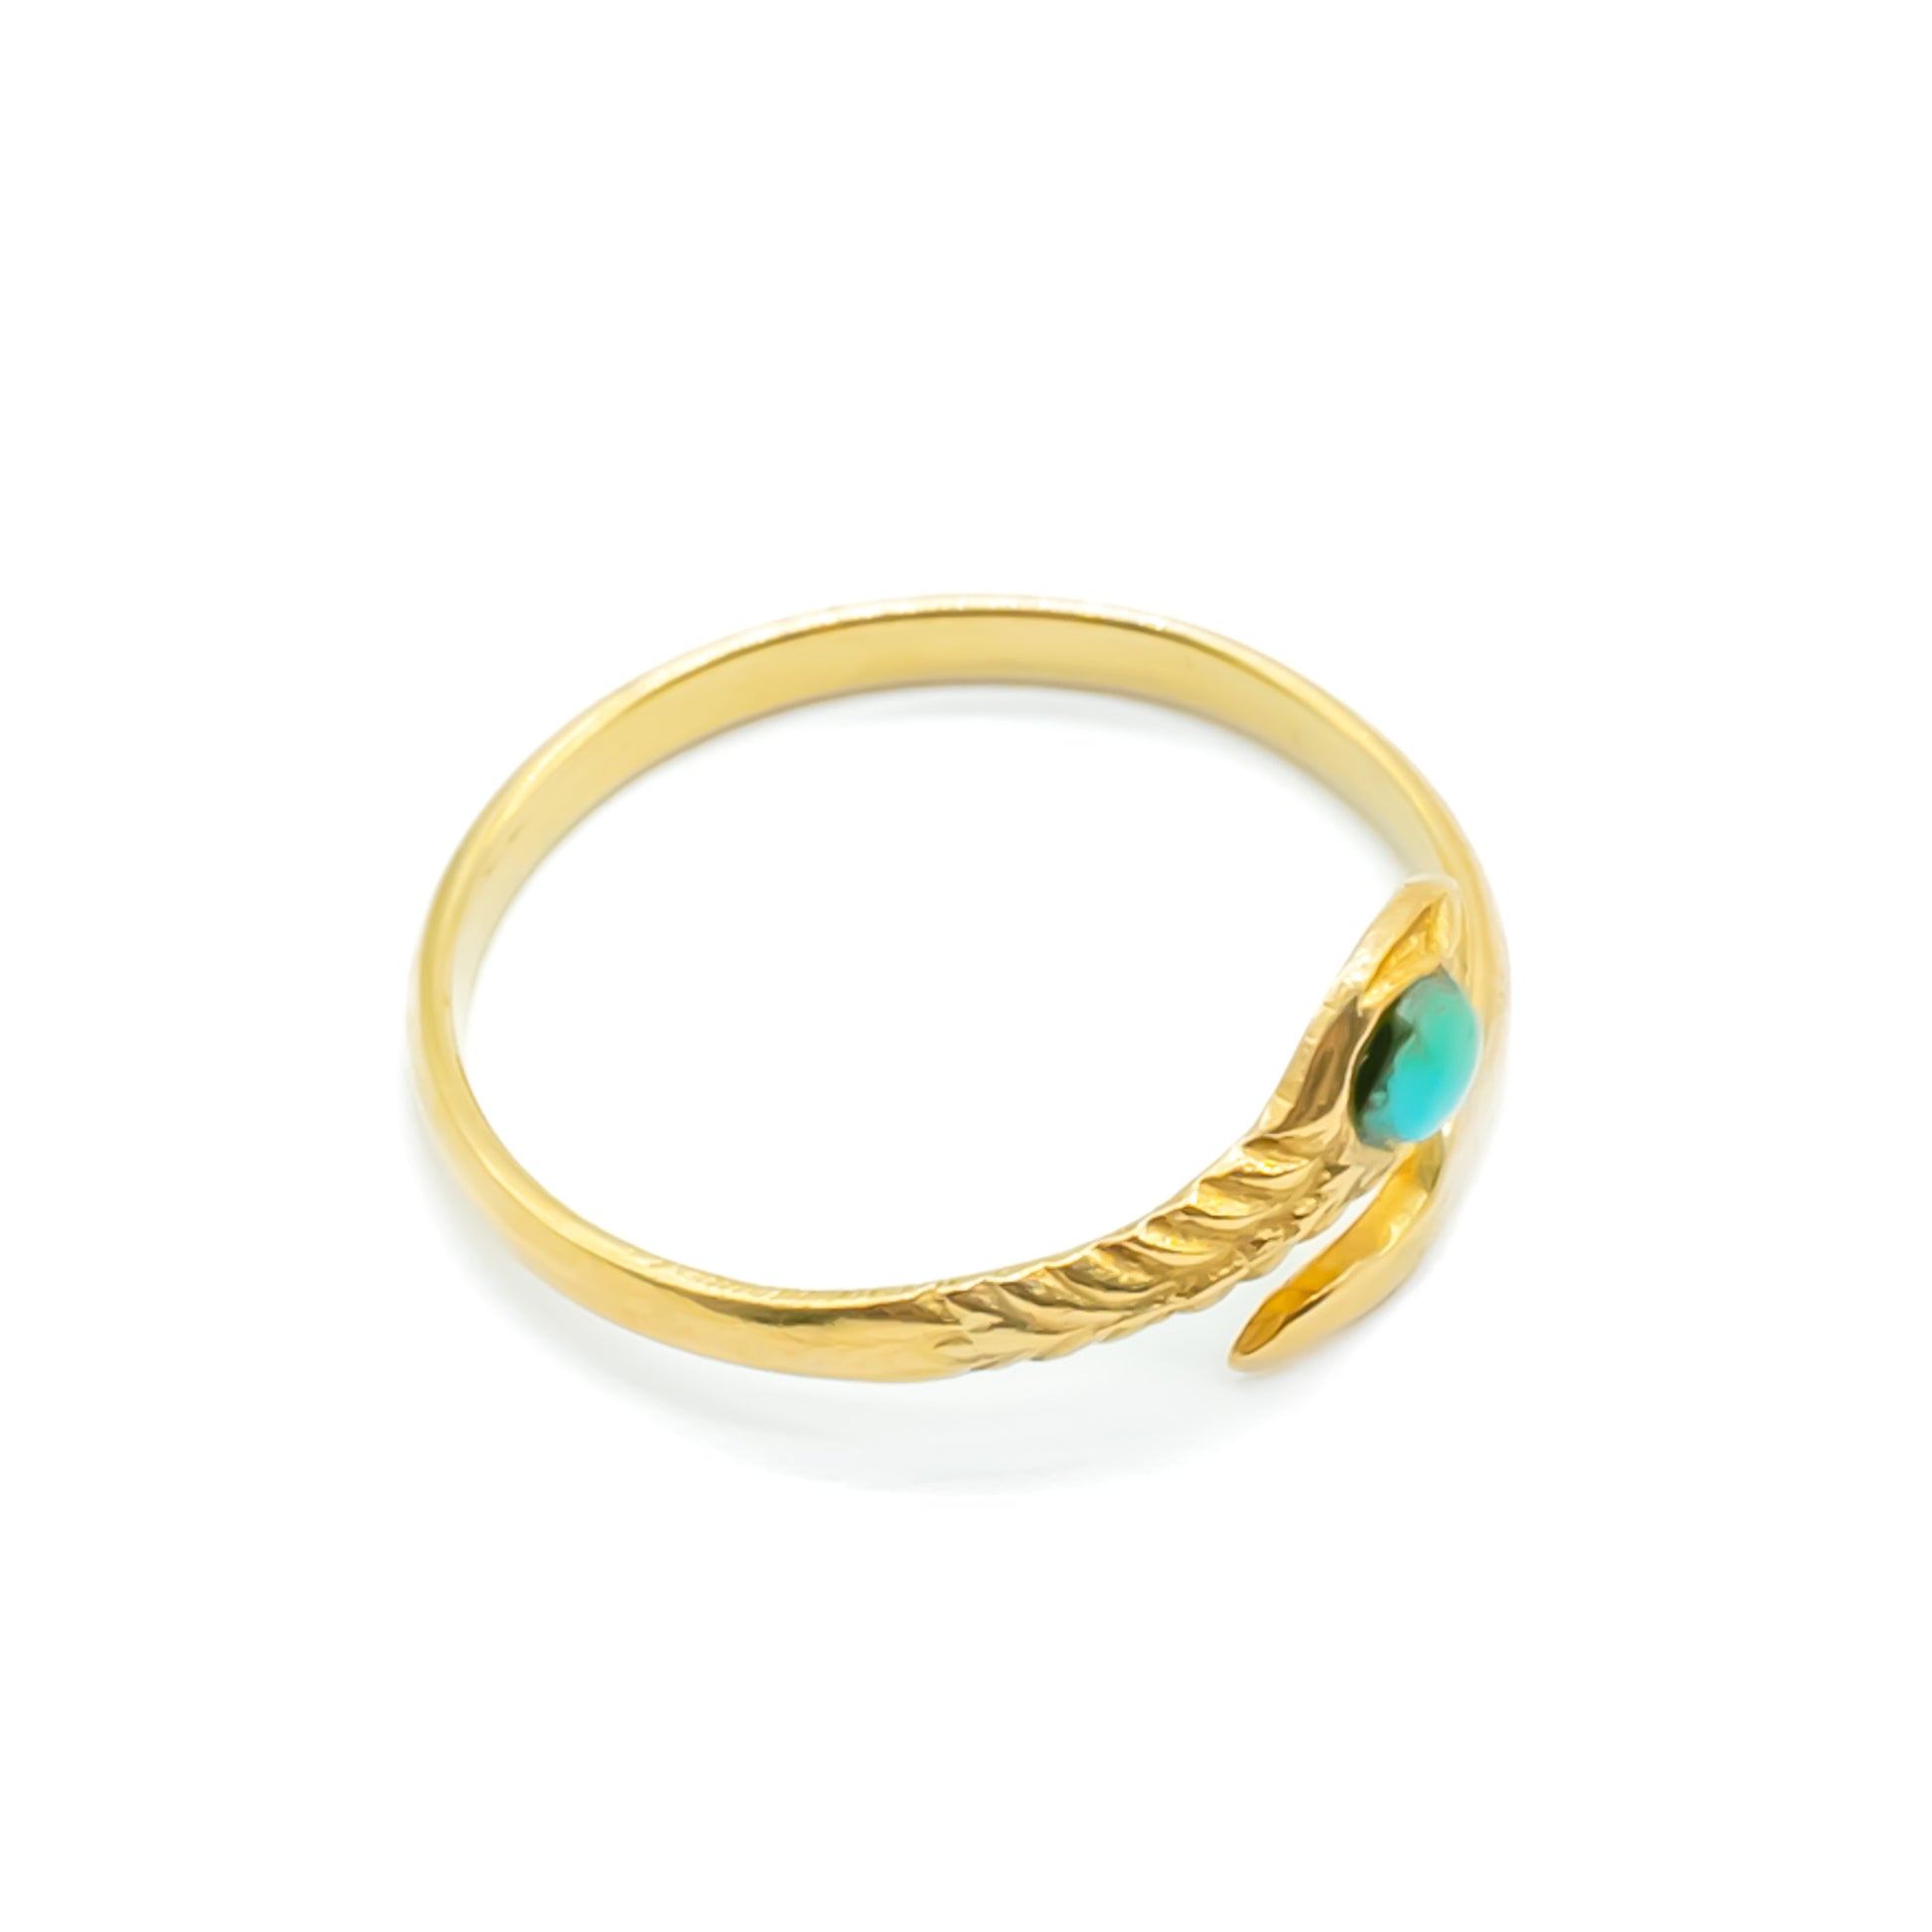 Delicate vintage 18ct gold snake ring with an engraved head, set with a cabochon turquoise stone. Italy.